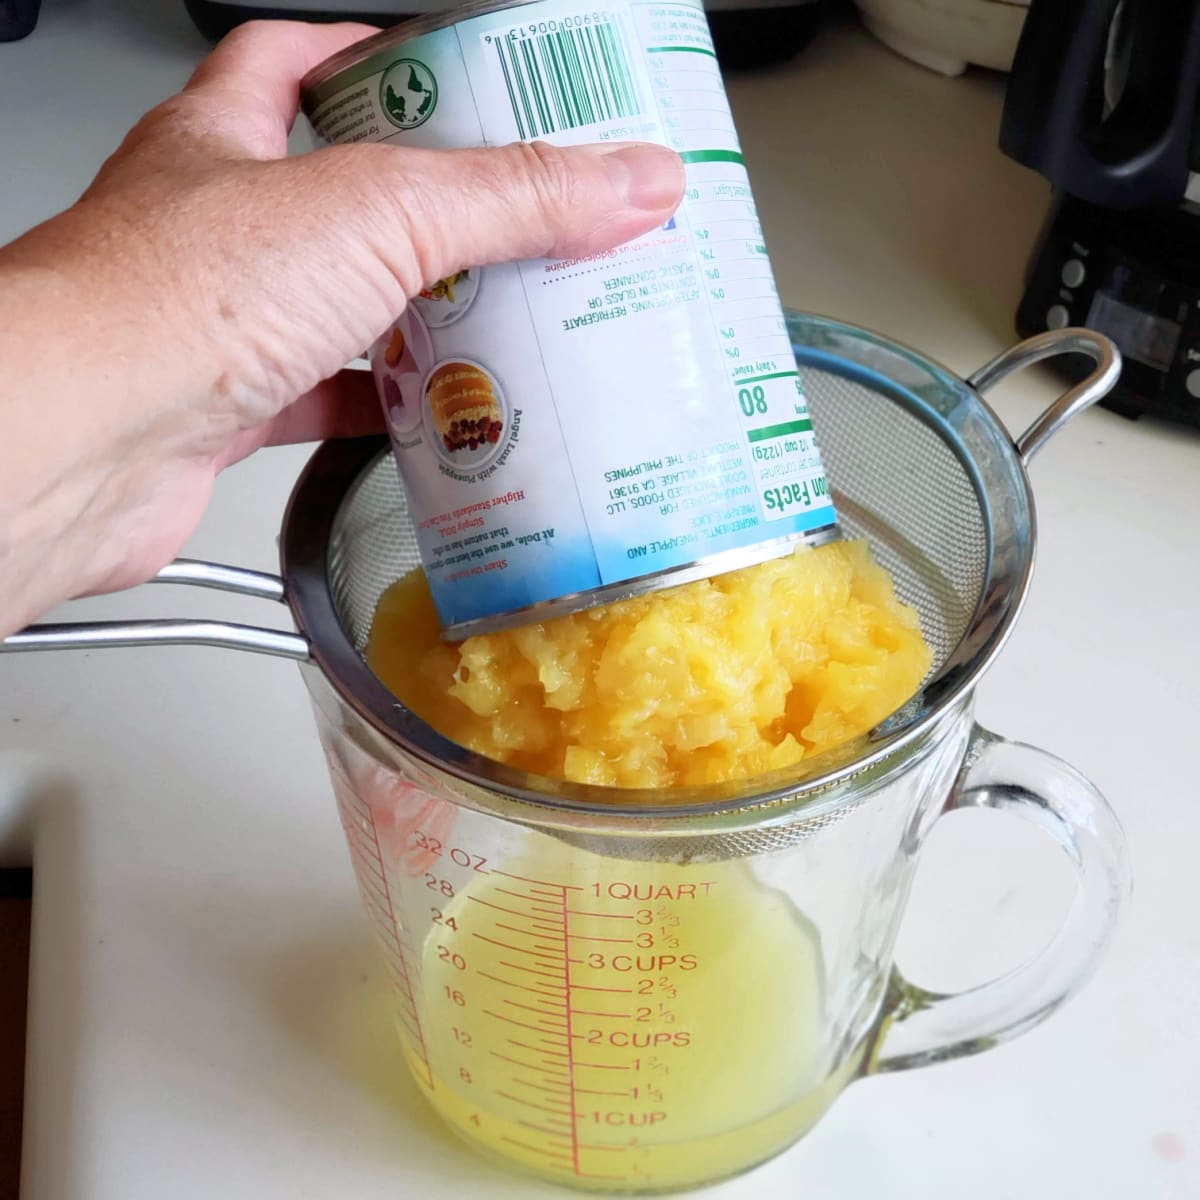 Pineapple draining in a mesh drainer into a glass measuring cup on a white counter